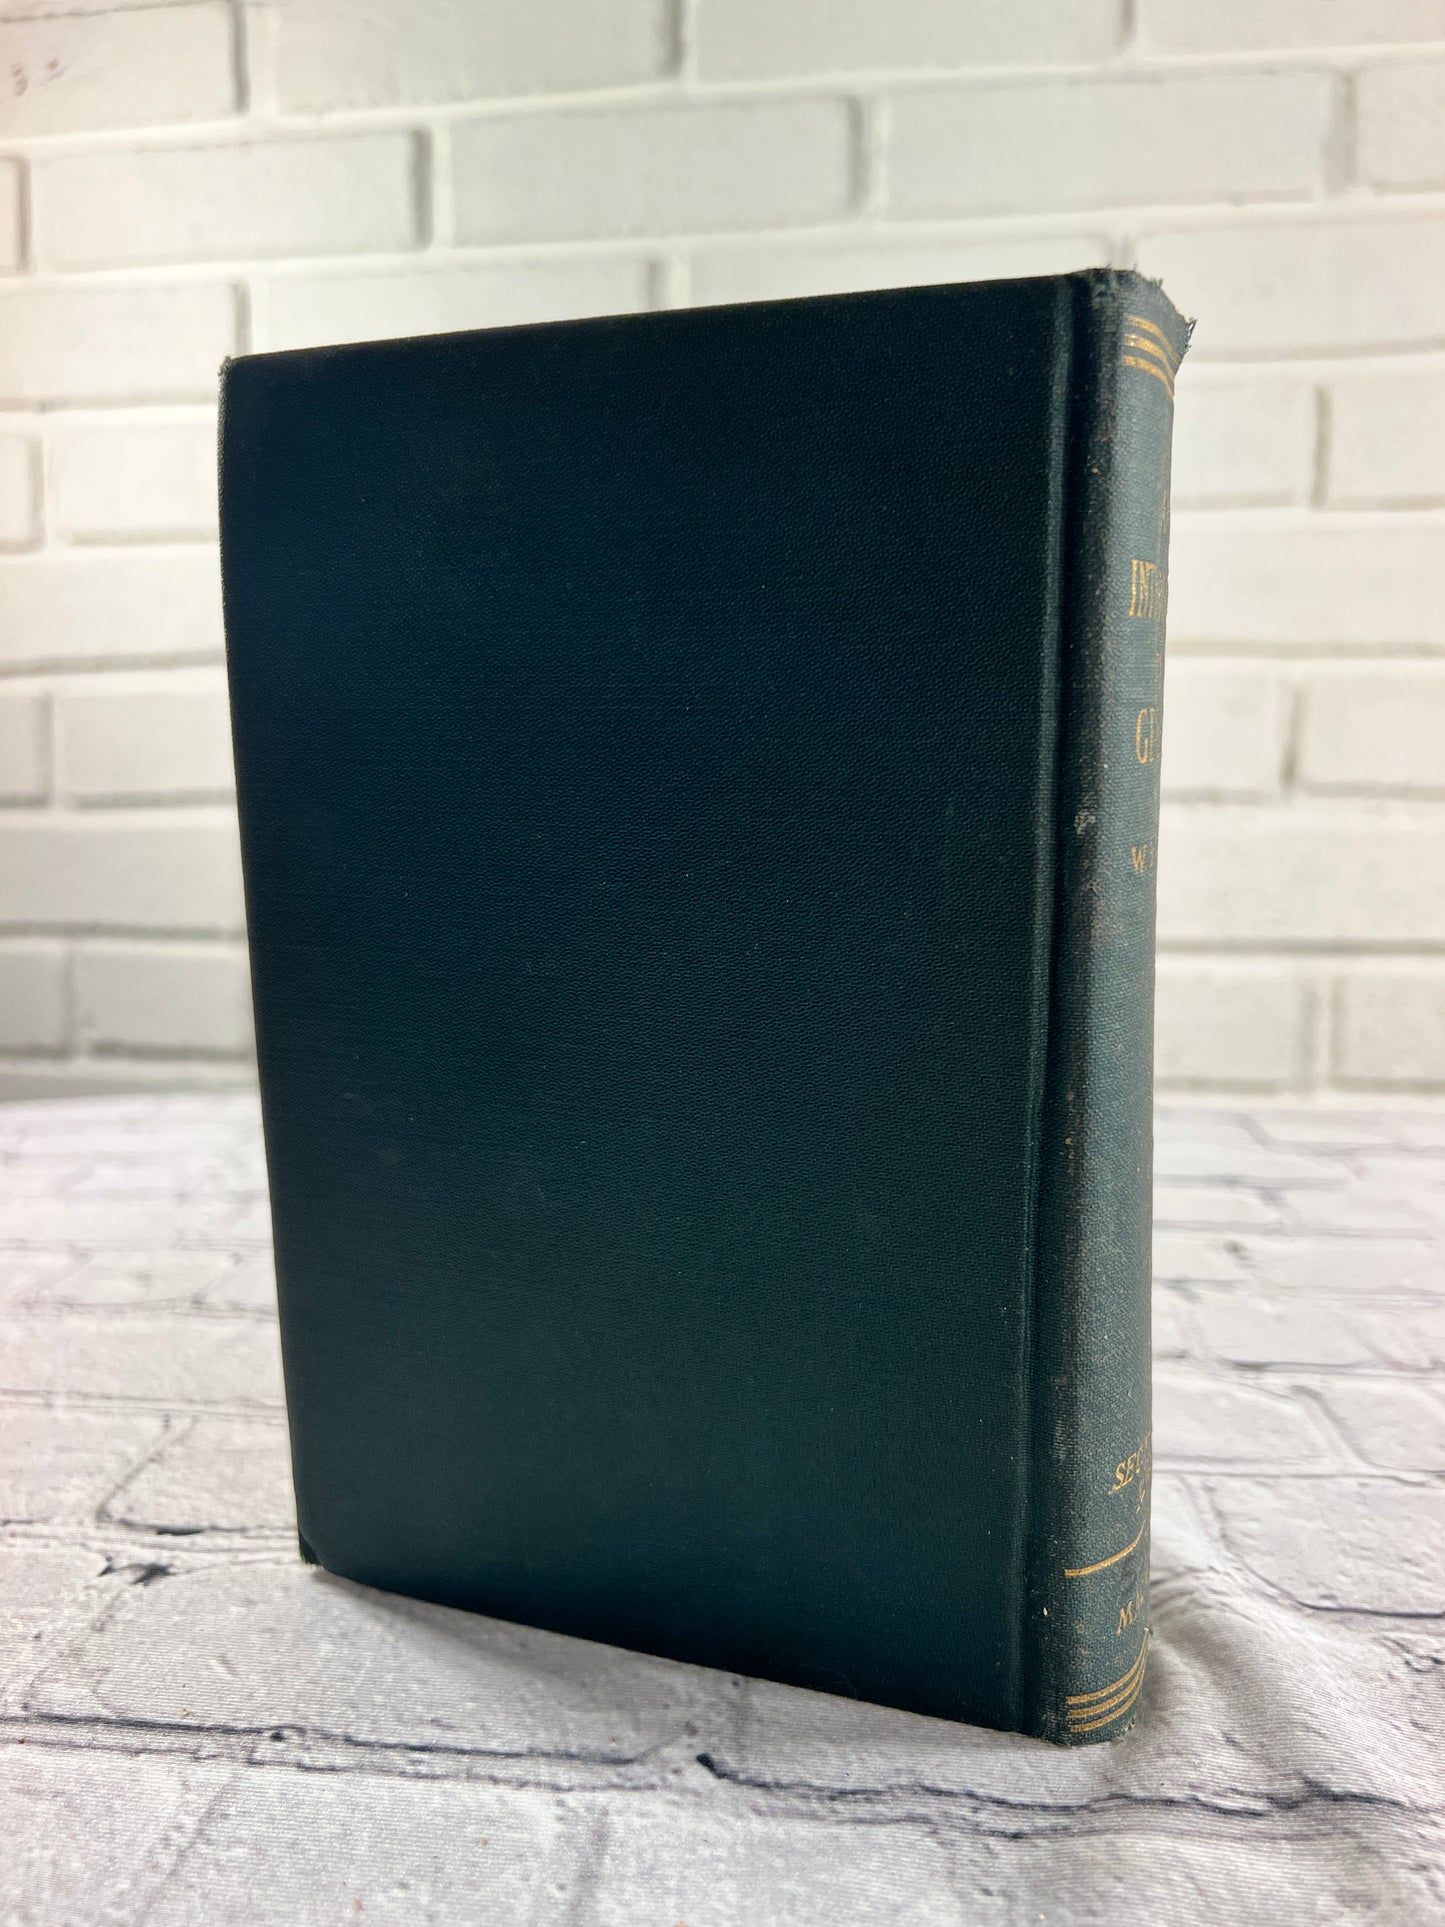 An Introduction to Geology by W.B. Scott [1922]